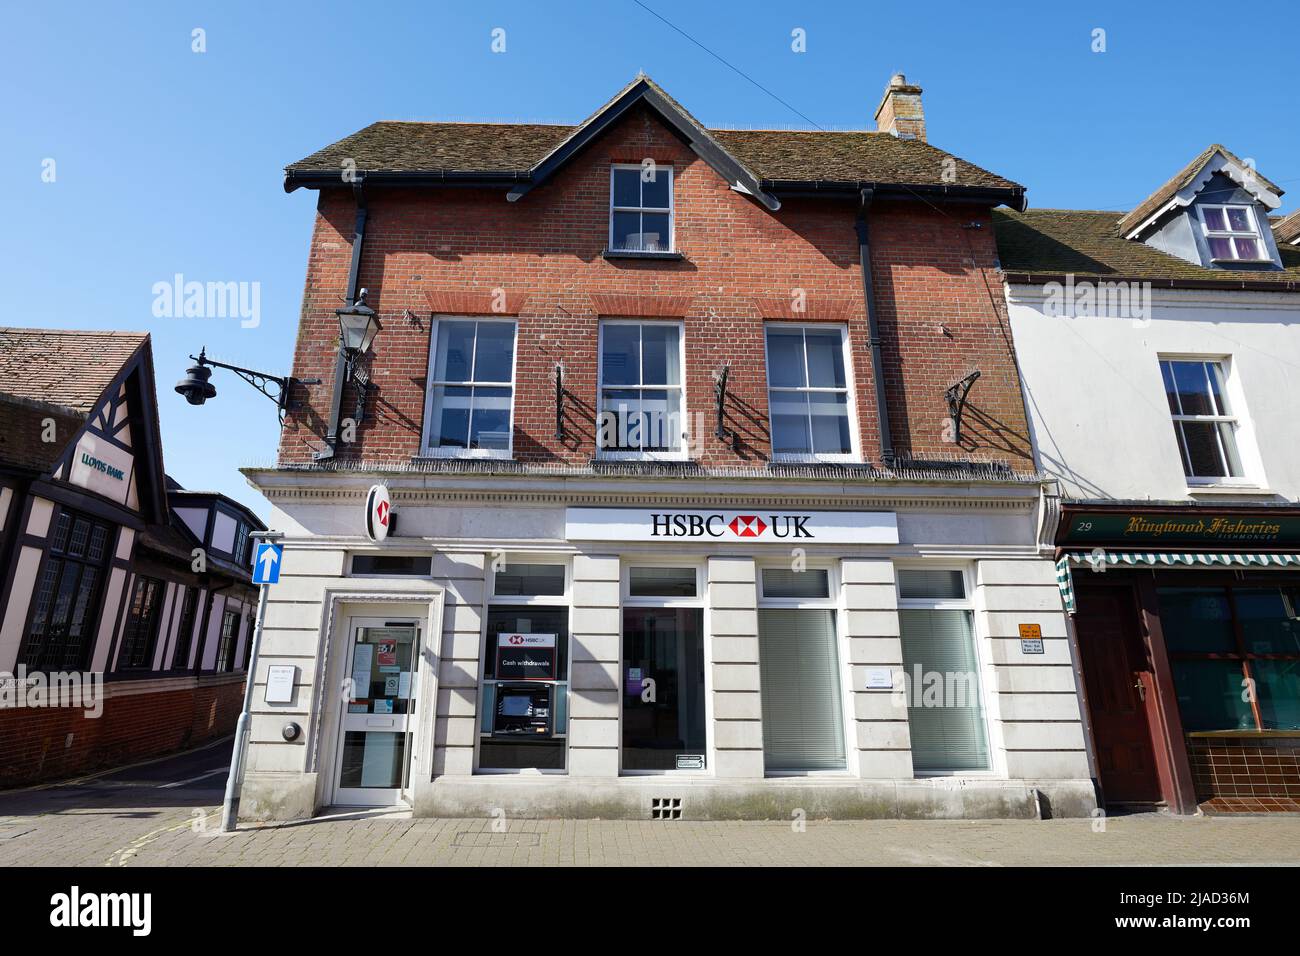 Ringwood, UK. - 22 May 2022: The HSBC bank at 27 High Street. In March 2022, HSBC UK announced the site would close in September of that year as part of 69 branch closures around the UK. Stock Photo